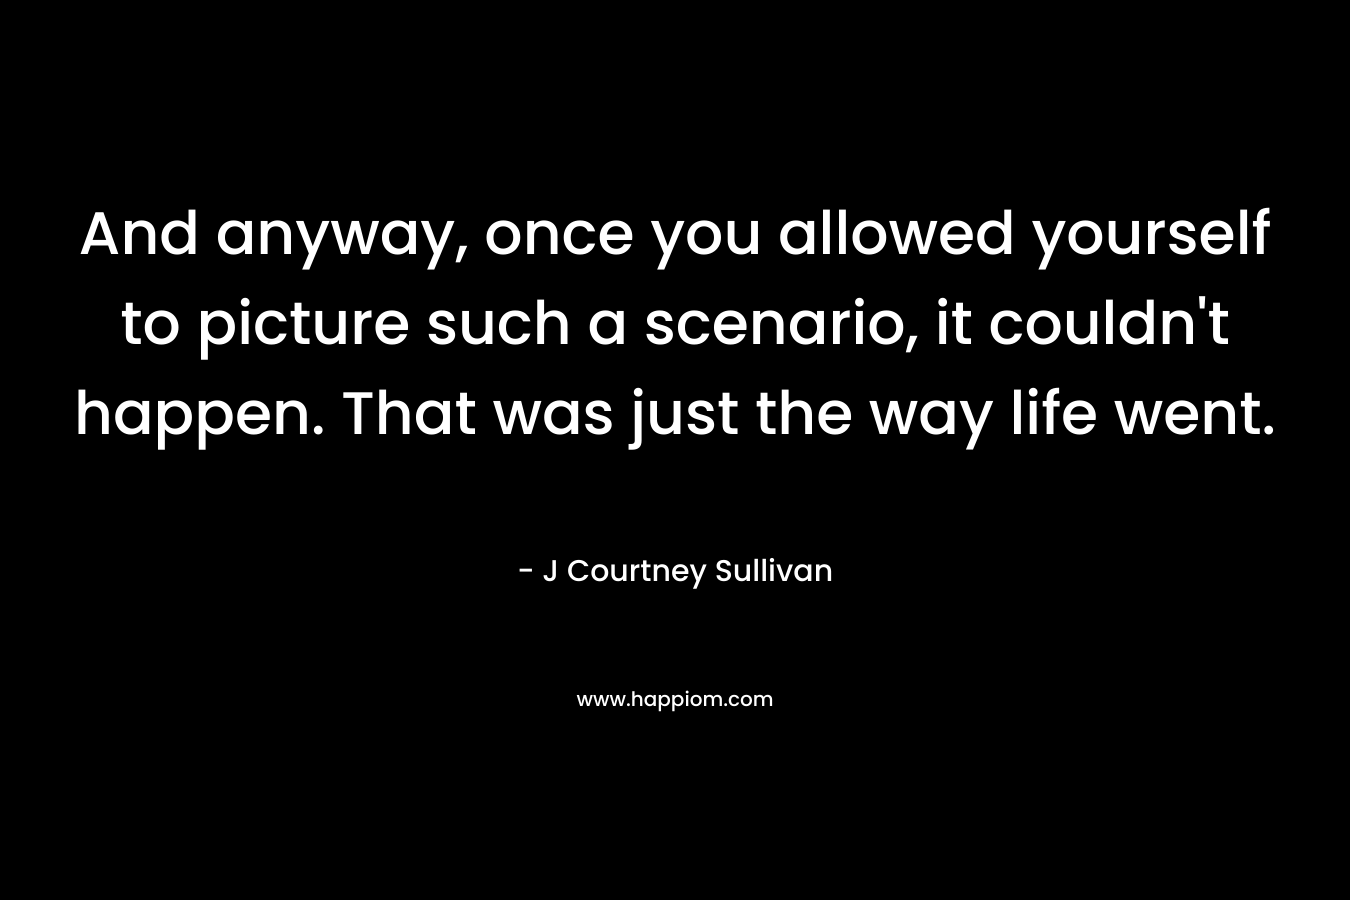 And anyway, once you allowed yourself to picture such a scenario, it couldn’t happen. That was just the way life went. – J Courtney Sullivan